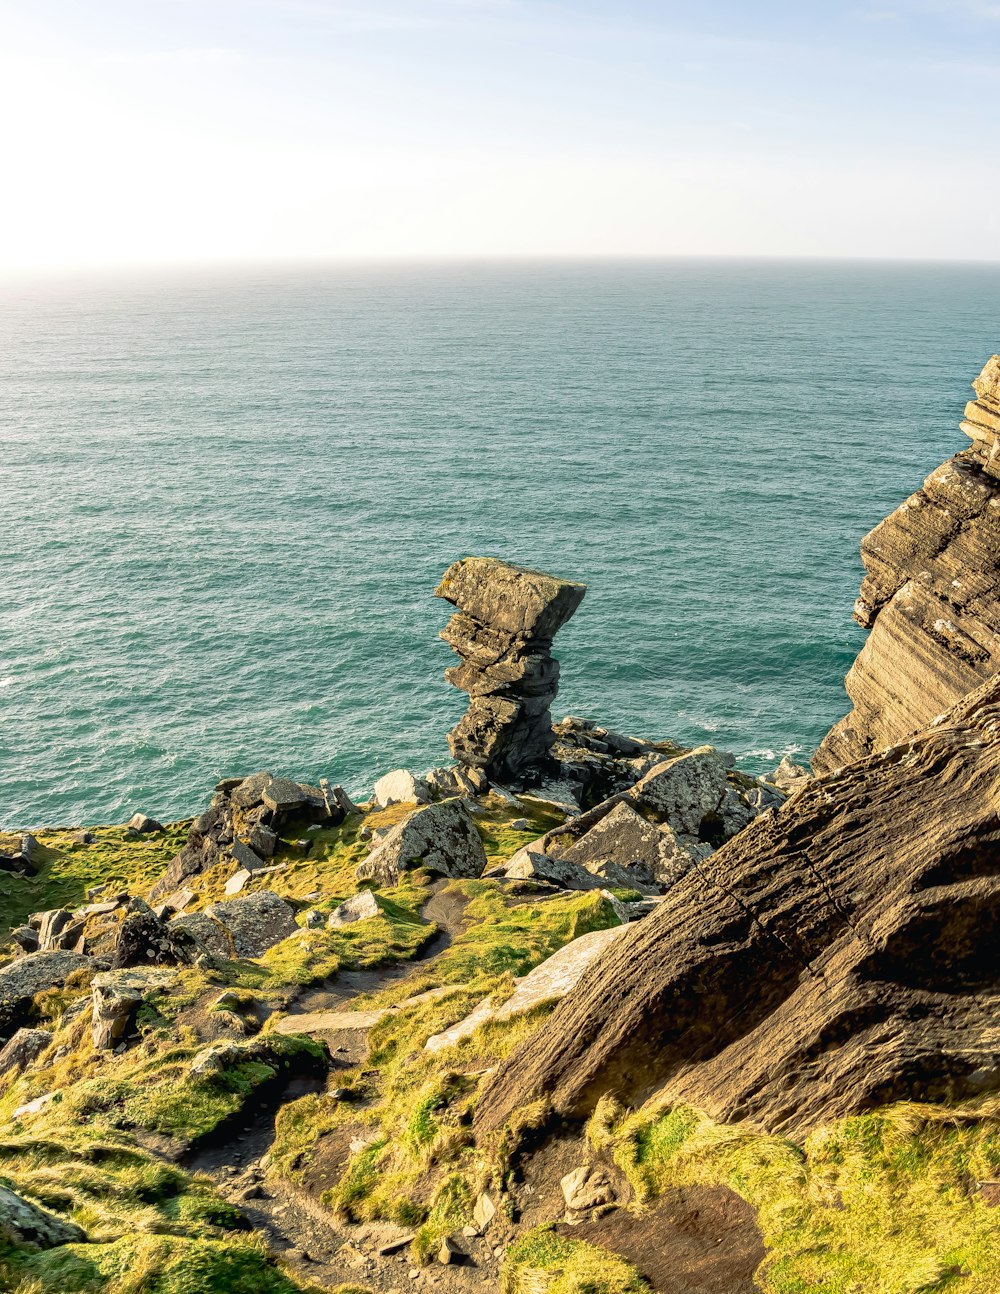 a rock formation on the edge of a cliff overlooking the ocean